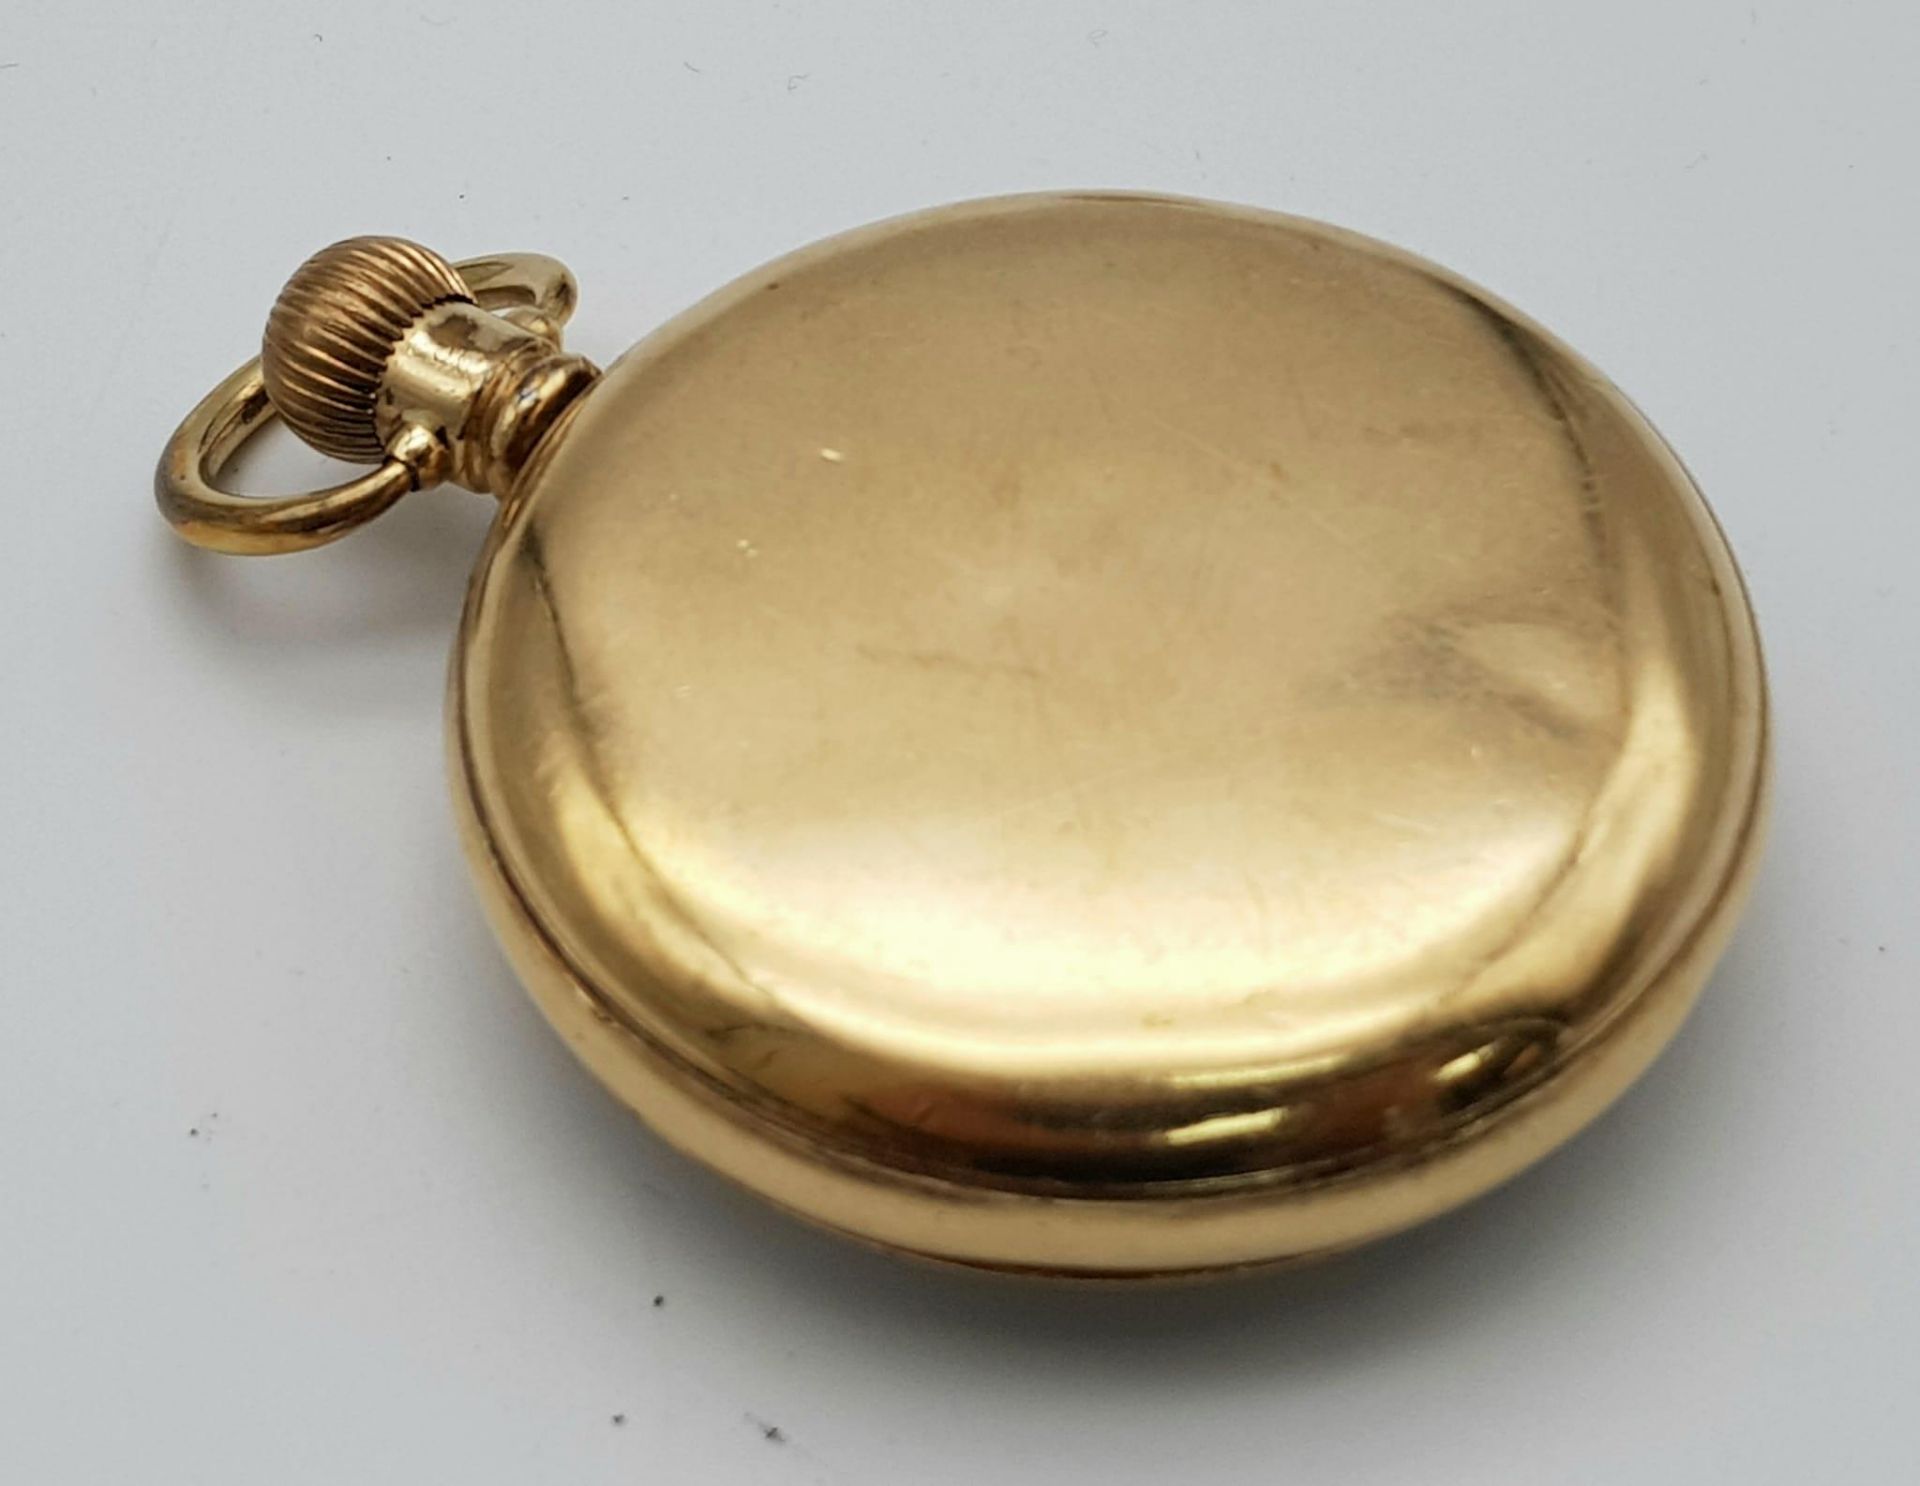 An Antique (1915) Gold Plated Hampden Watch Co. Pocket Watch. 21 jewels. 3328478 movement. Top - Image 3 of 5